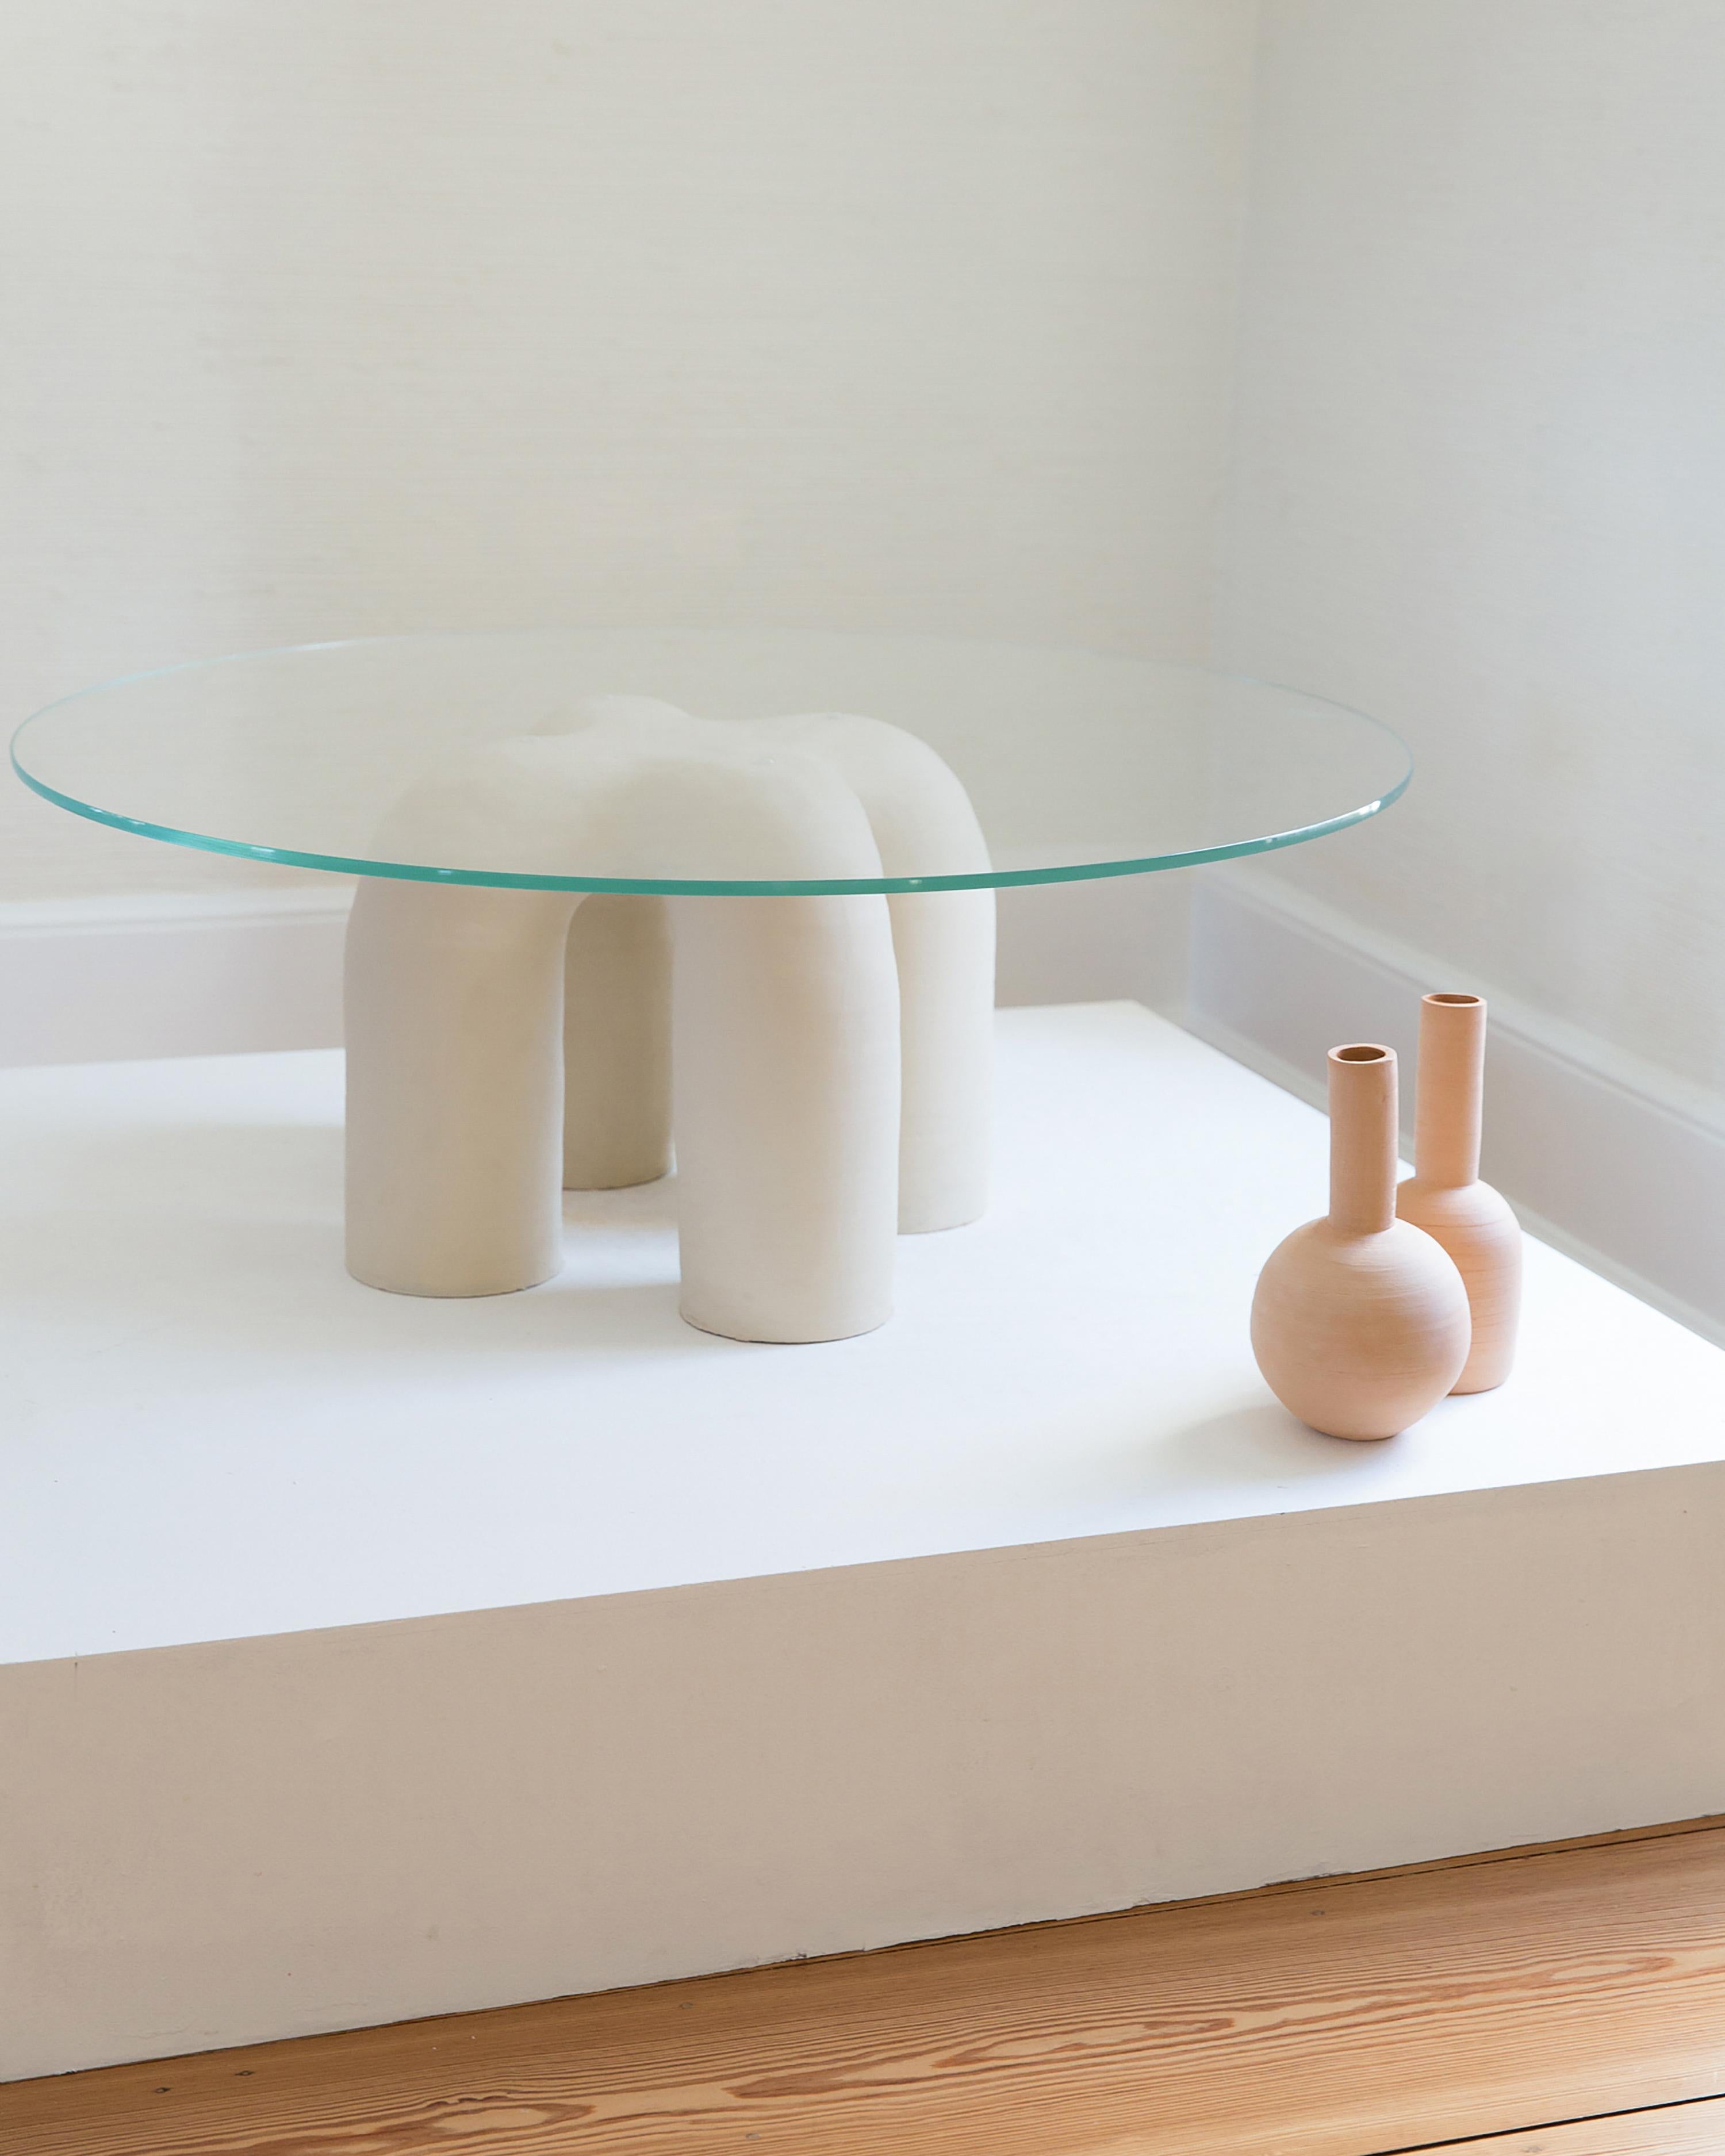 This organic shaped table includes a hand-built ceramic housing available in several glaze colors, with a 1/2